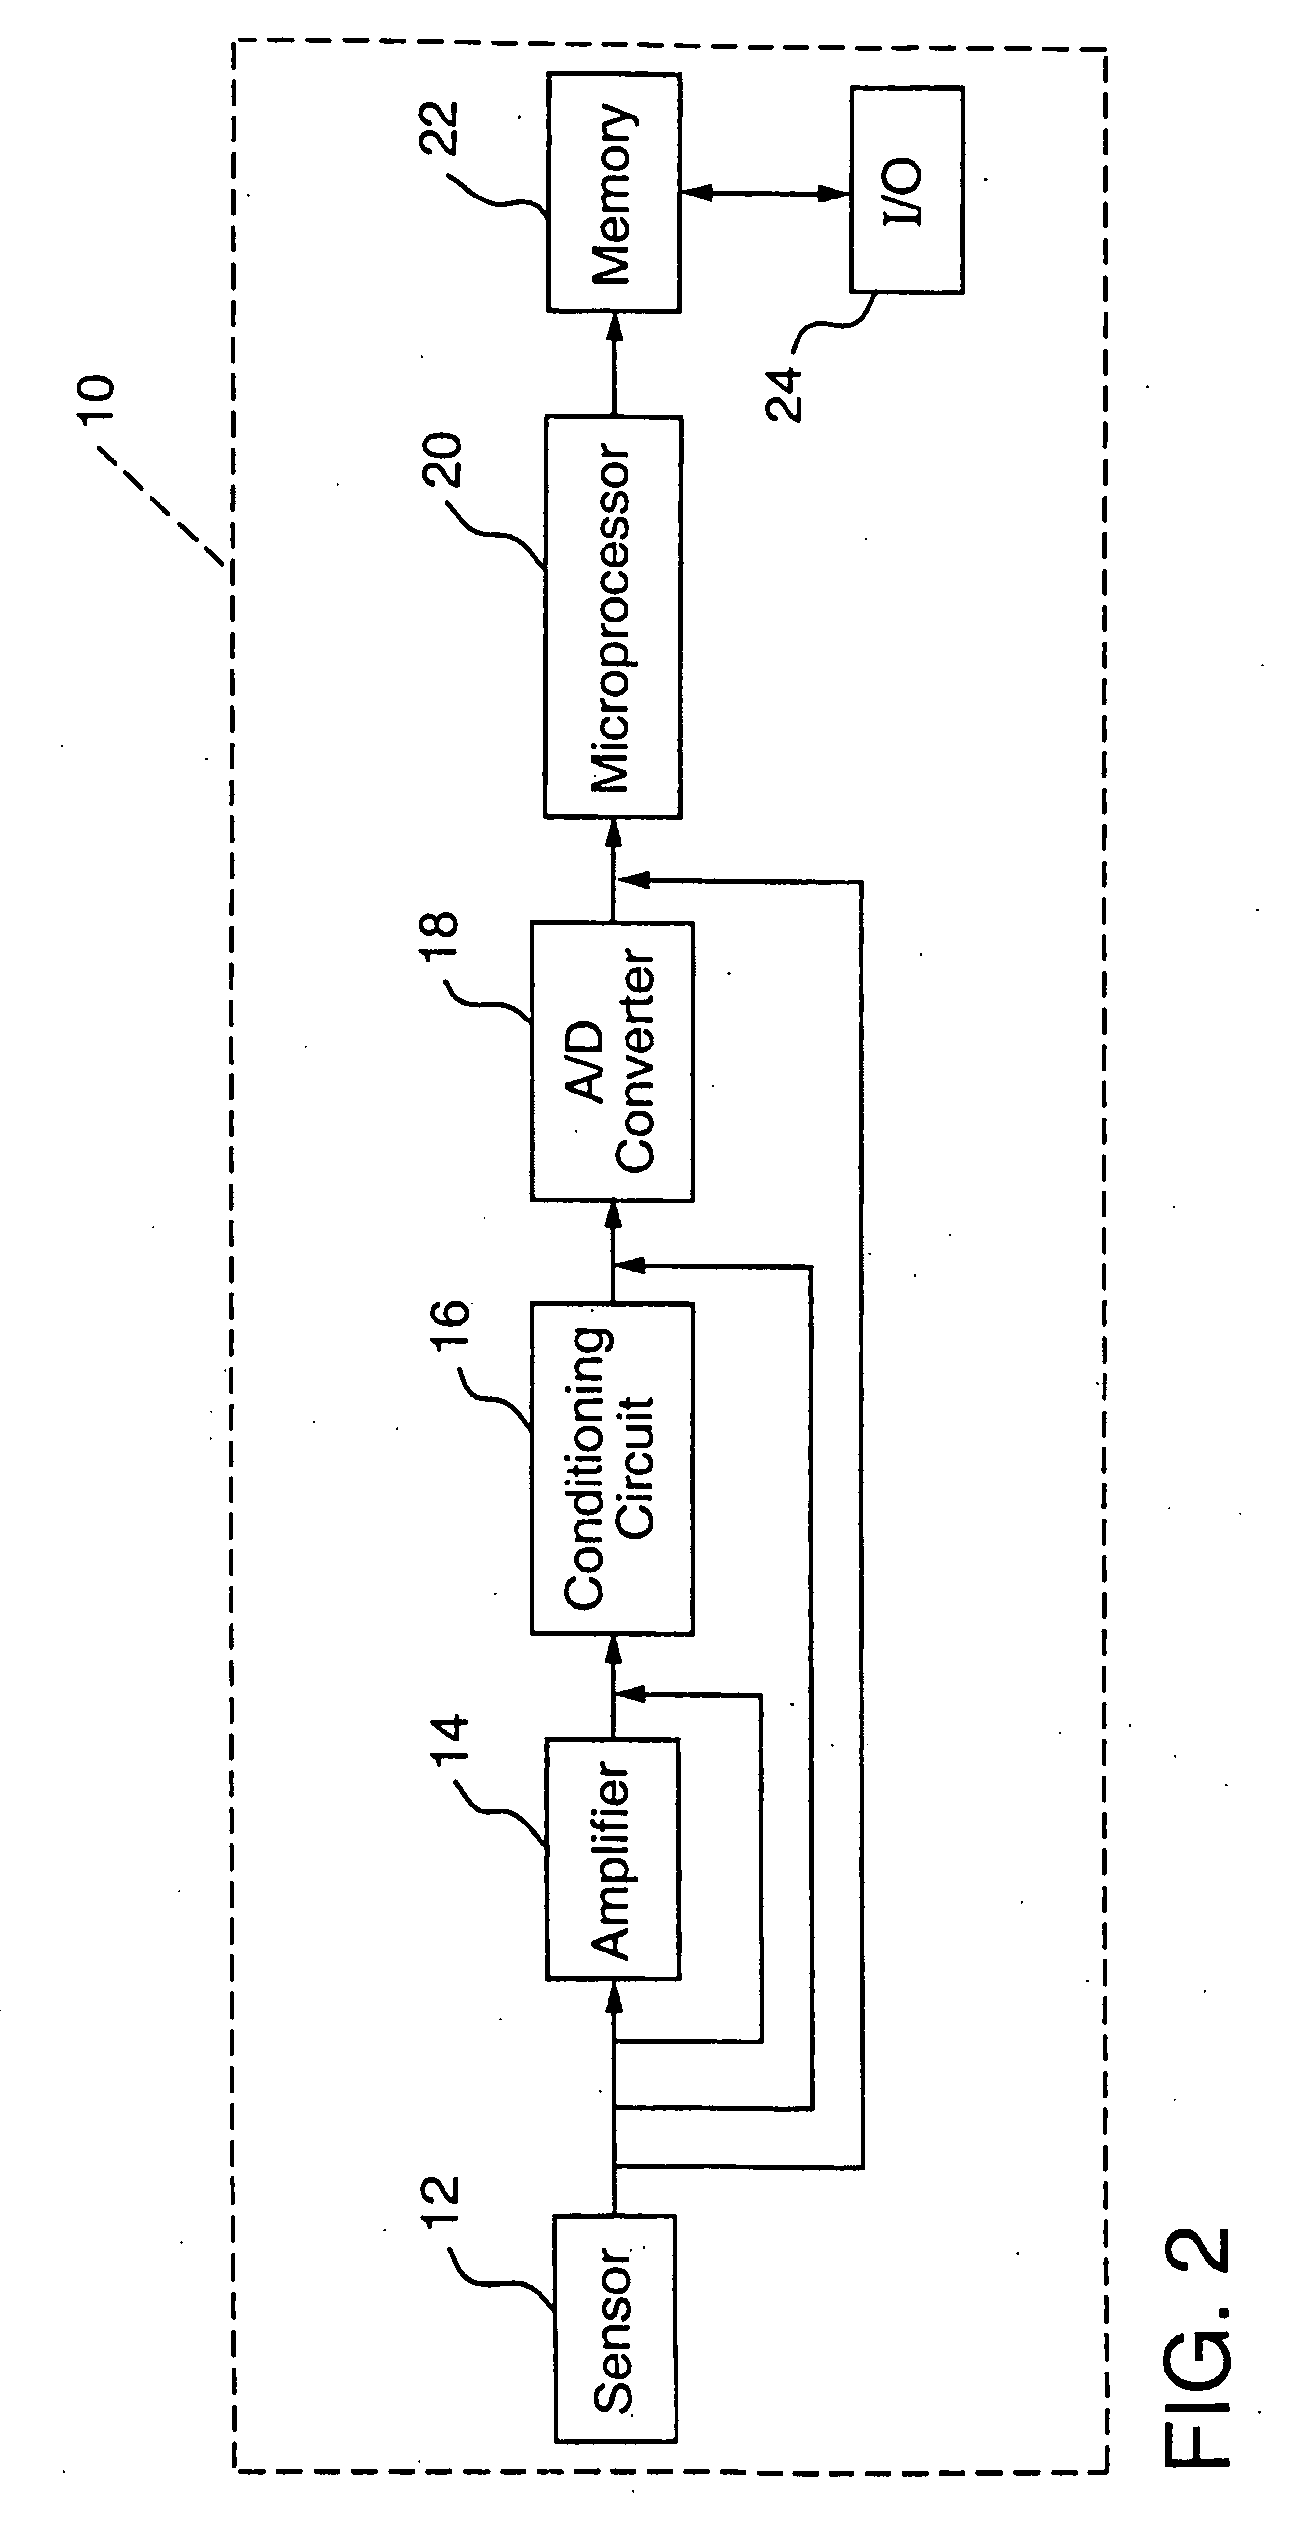 System for detecting, monitoring, and reporting an individual's physiological or contextual status